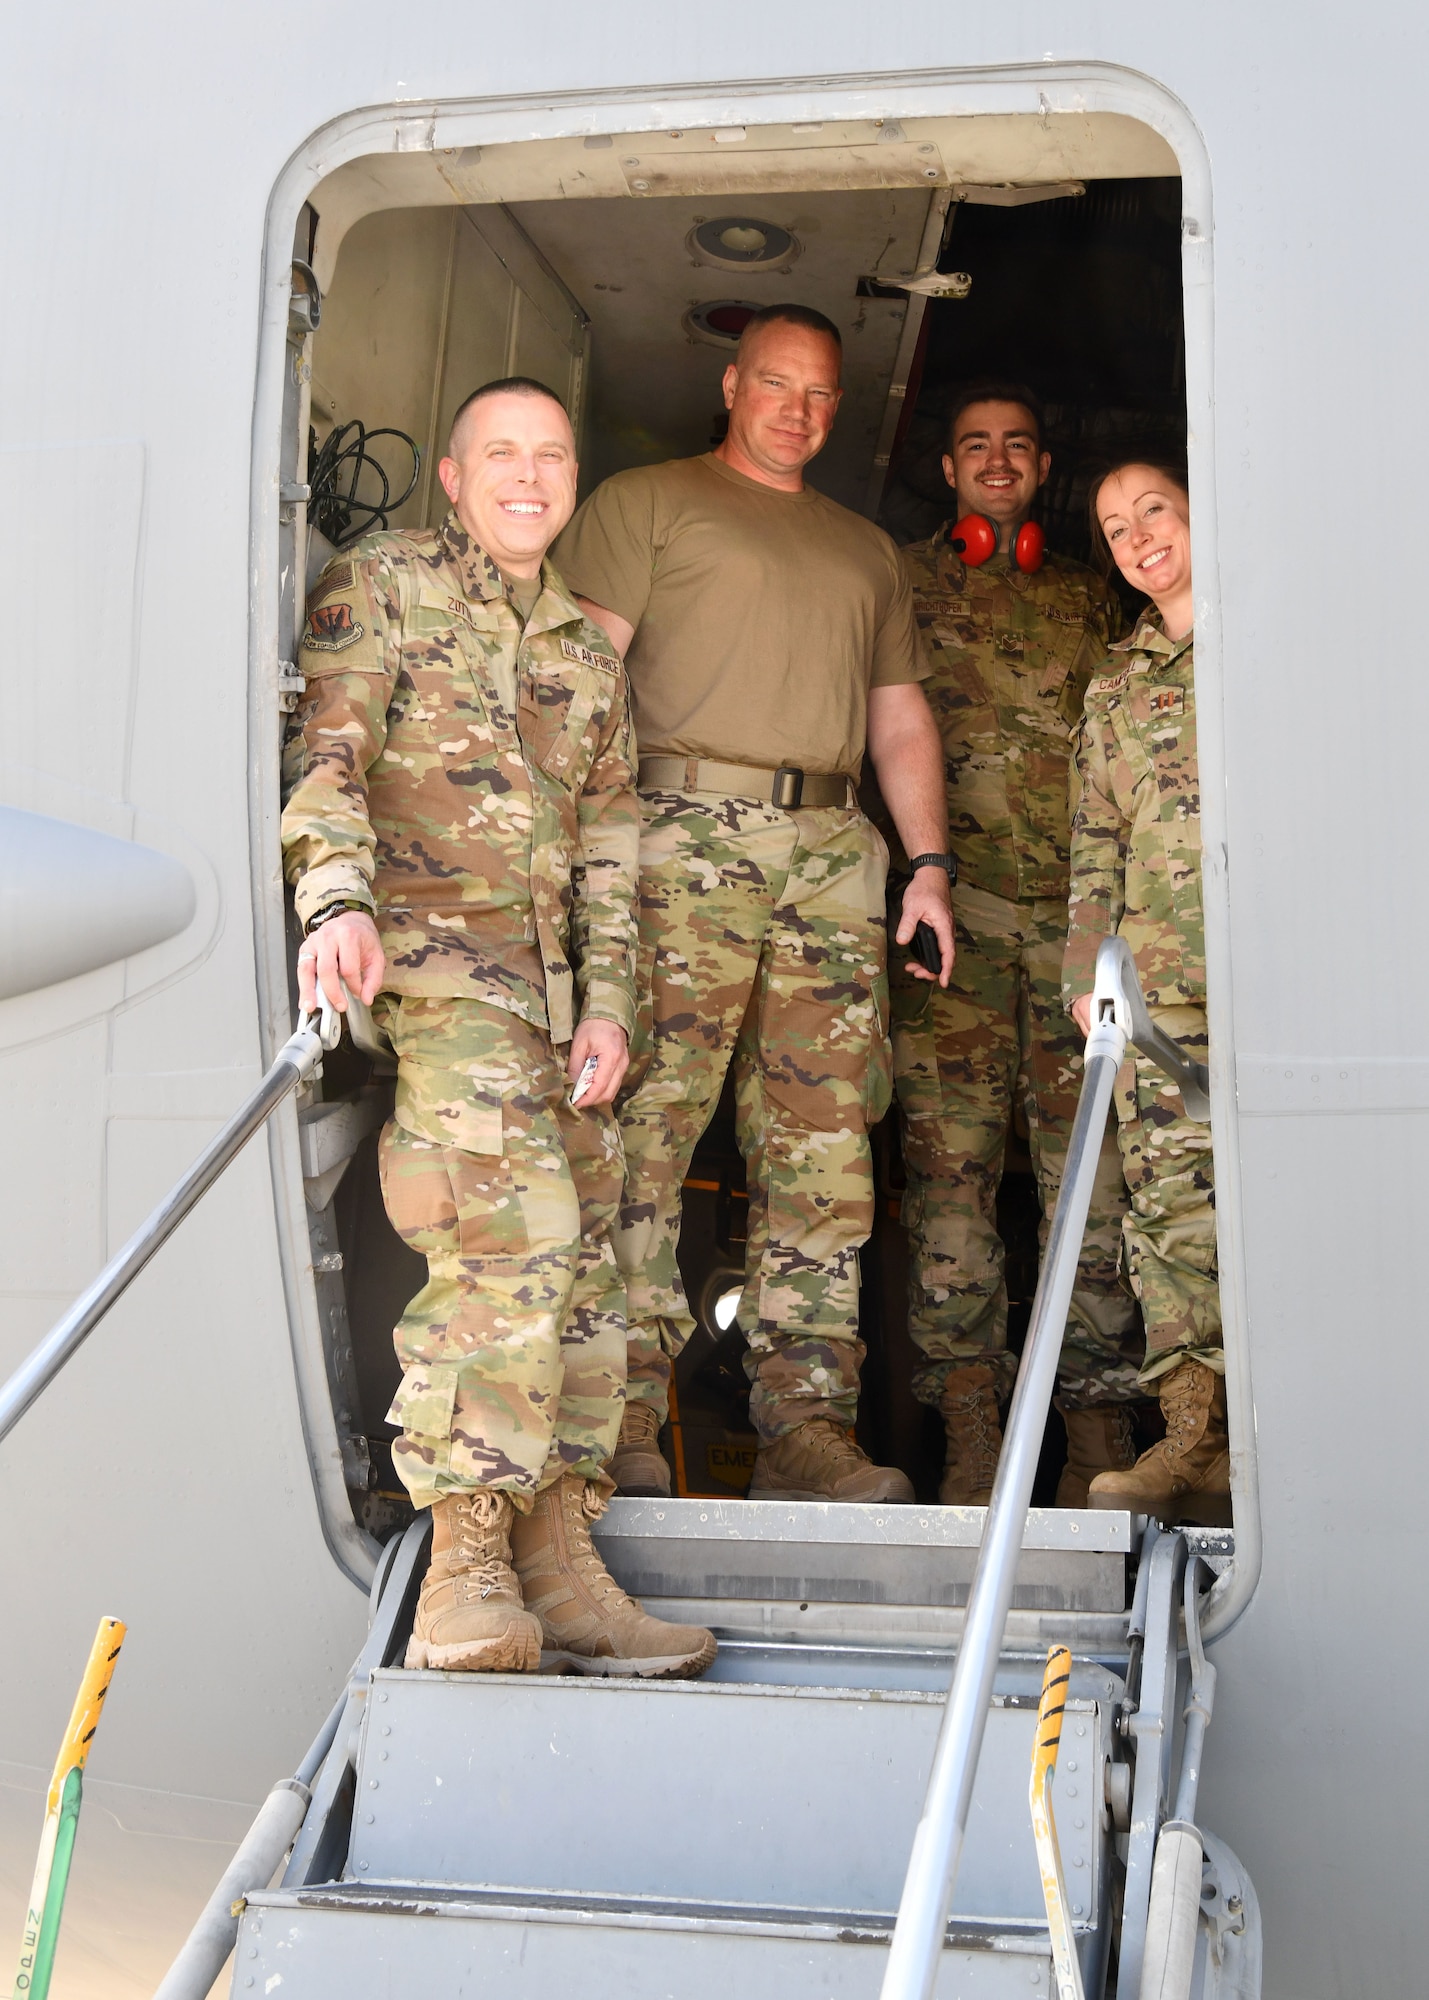 1st Lt. Vinny Zotto, 104 MDG supervisor, Master Sgt. Michael Hoar, 104th Fighter Wing first sergeant., Tech. Sgt. Austin Von Richthofen, 104 MDG aerospace medical technician and Capt. Krista Campbell, 104 MDG nurse stand in the doorway of a C-17 Globemaster III during refueling at Travis Air Force Base, California, April 23, 2022. These members are traveling to Tripler Army Medical Center in Honolulu, Hawaii to complete training requirements. (U.S. Air National Guard Photo by Senior Airman Camille Lienau)